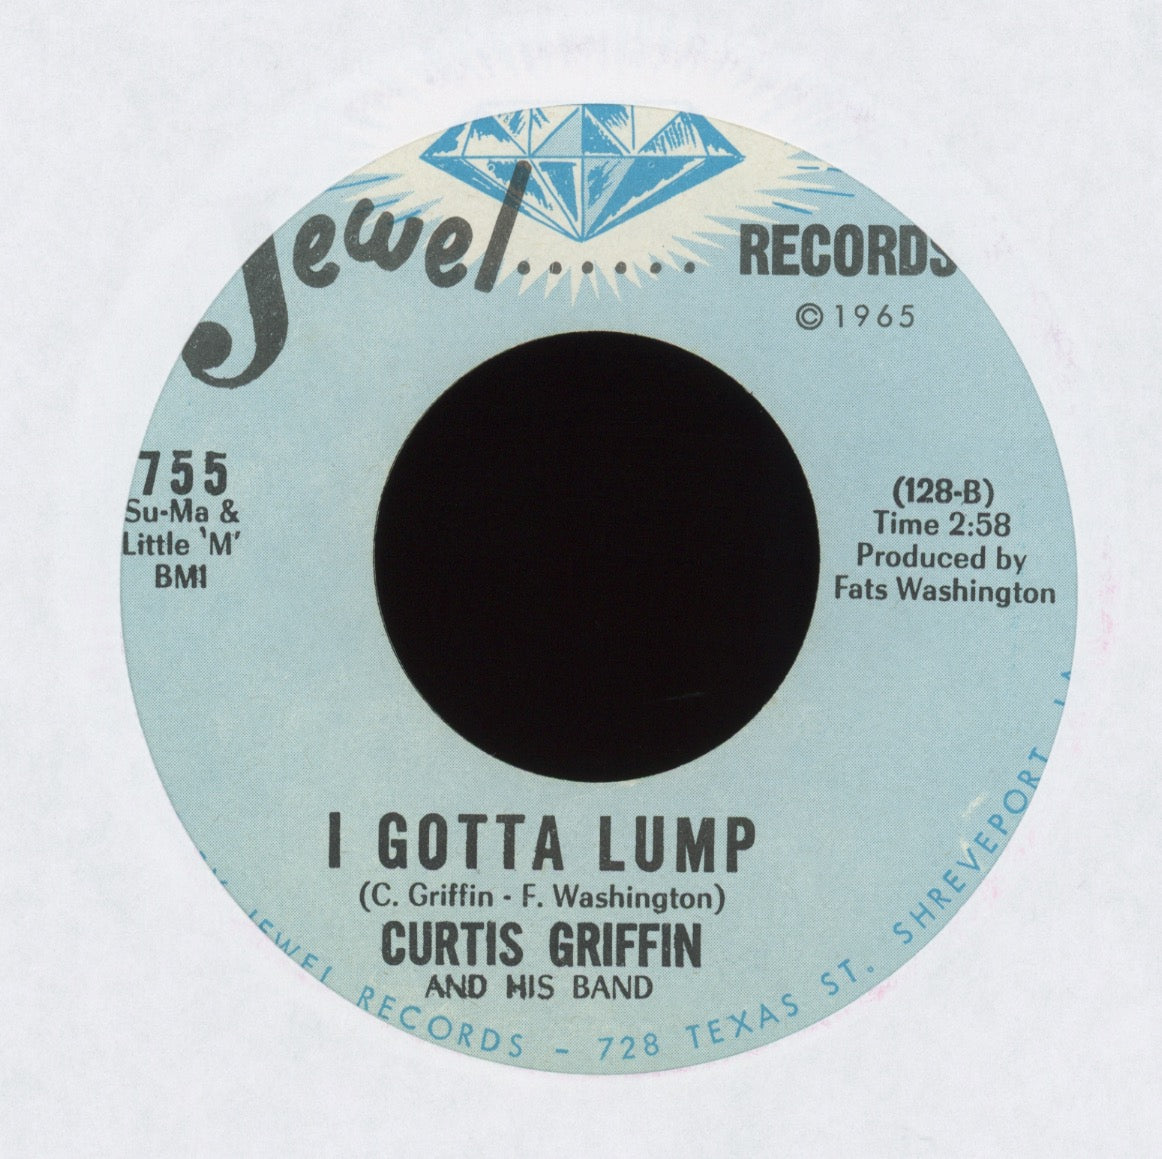 Curtis Griffin And His Band - I Gotta Lump on Jewel